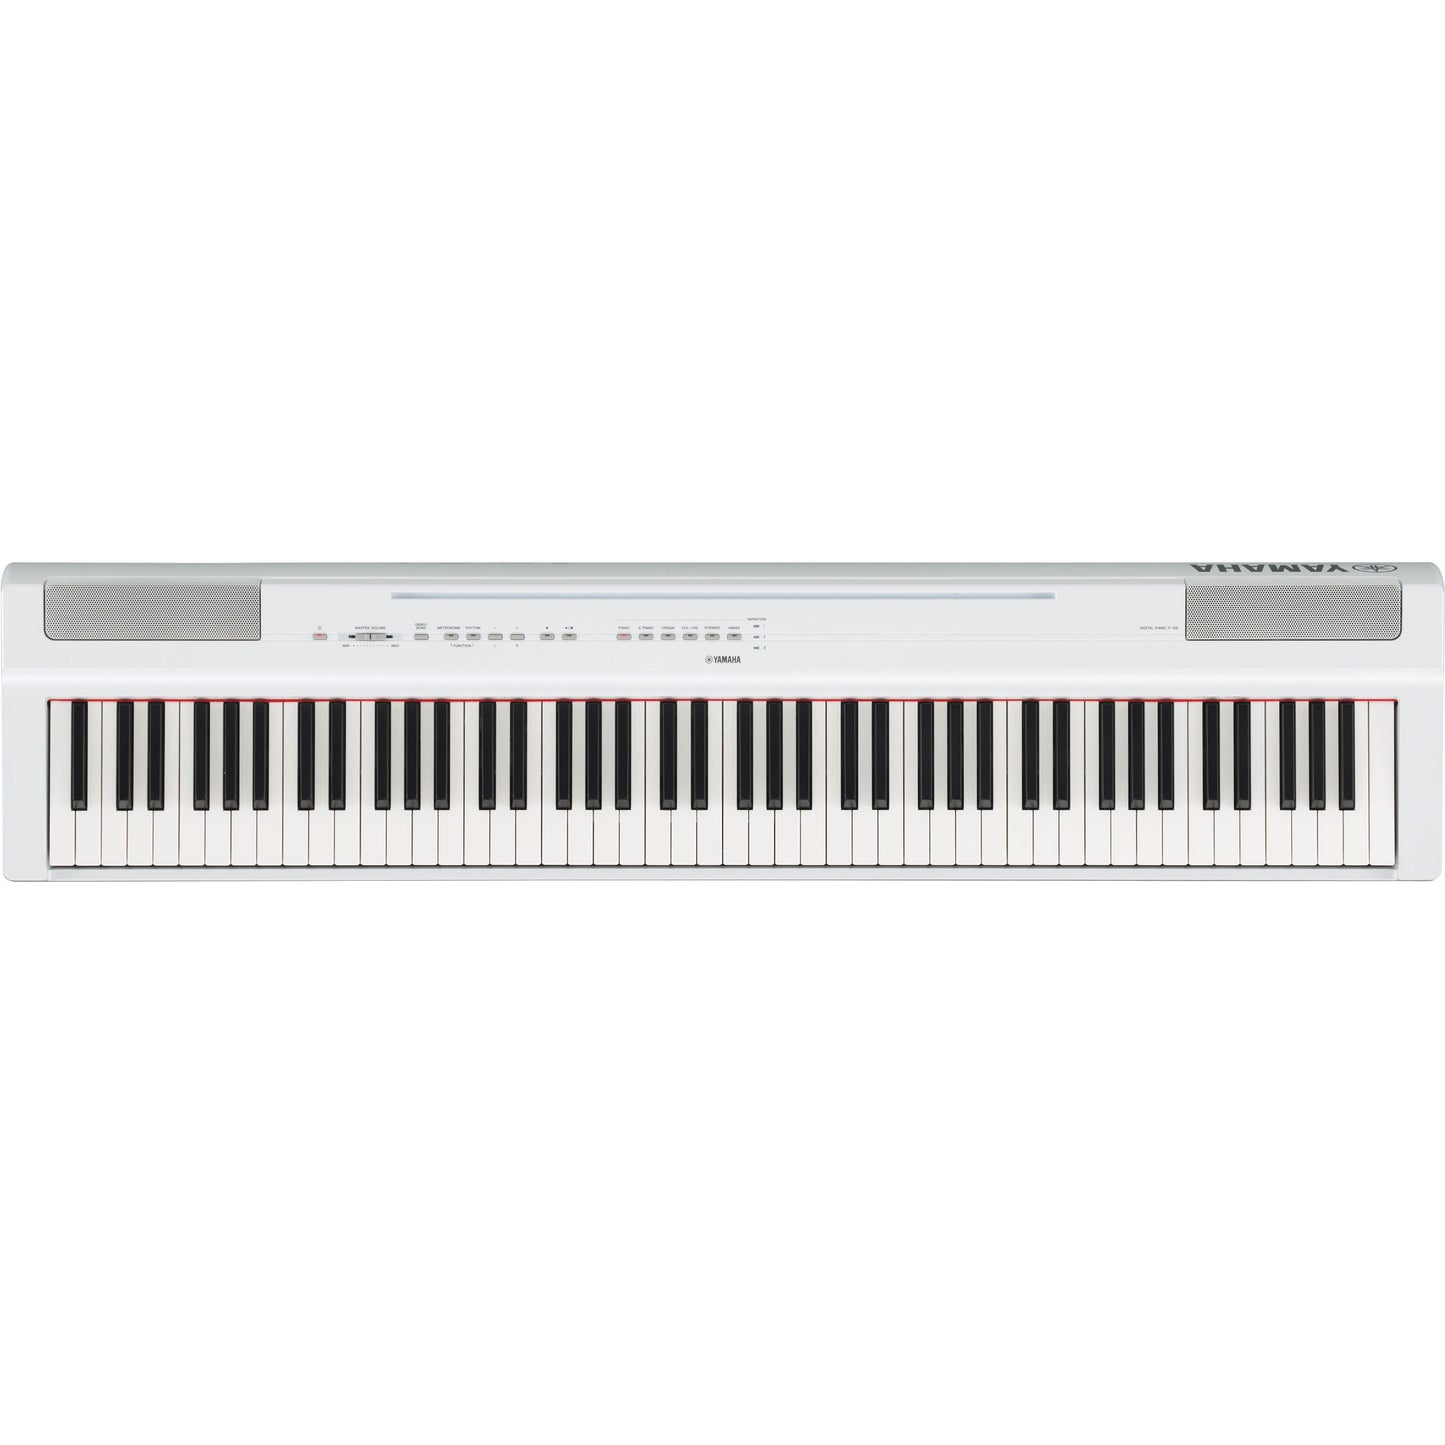 (Limited Time) YAMAHA P125 (Chinese Ver.) Digital Piano